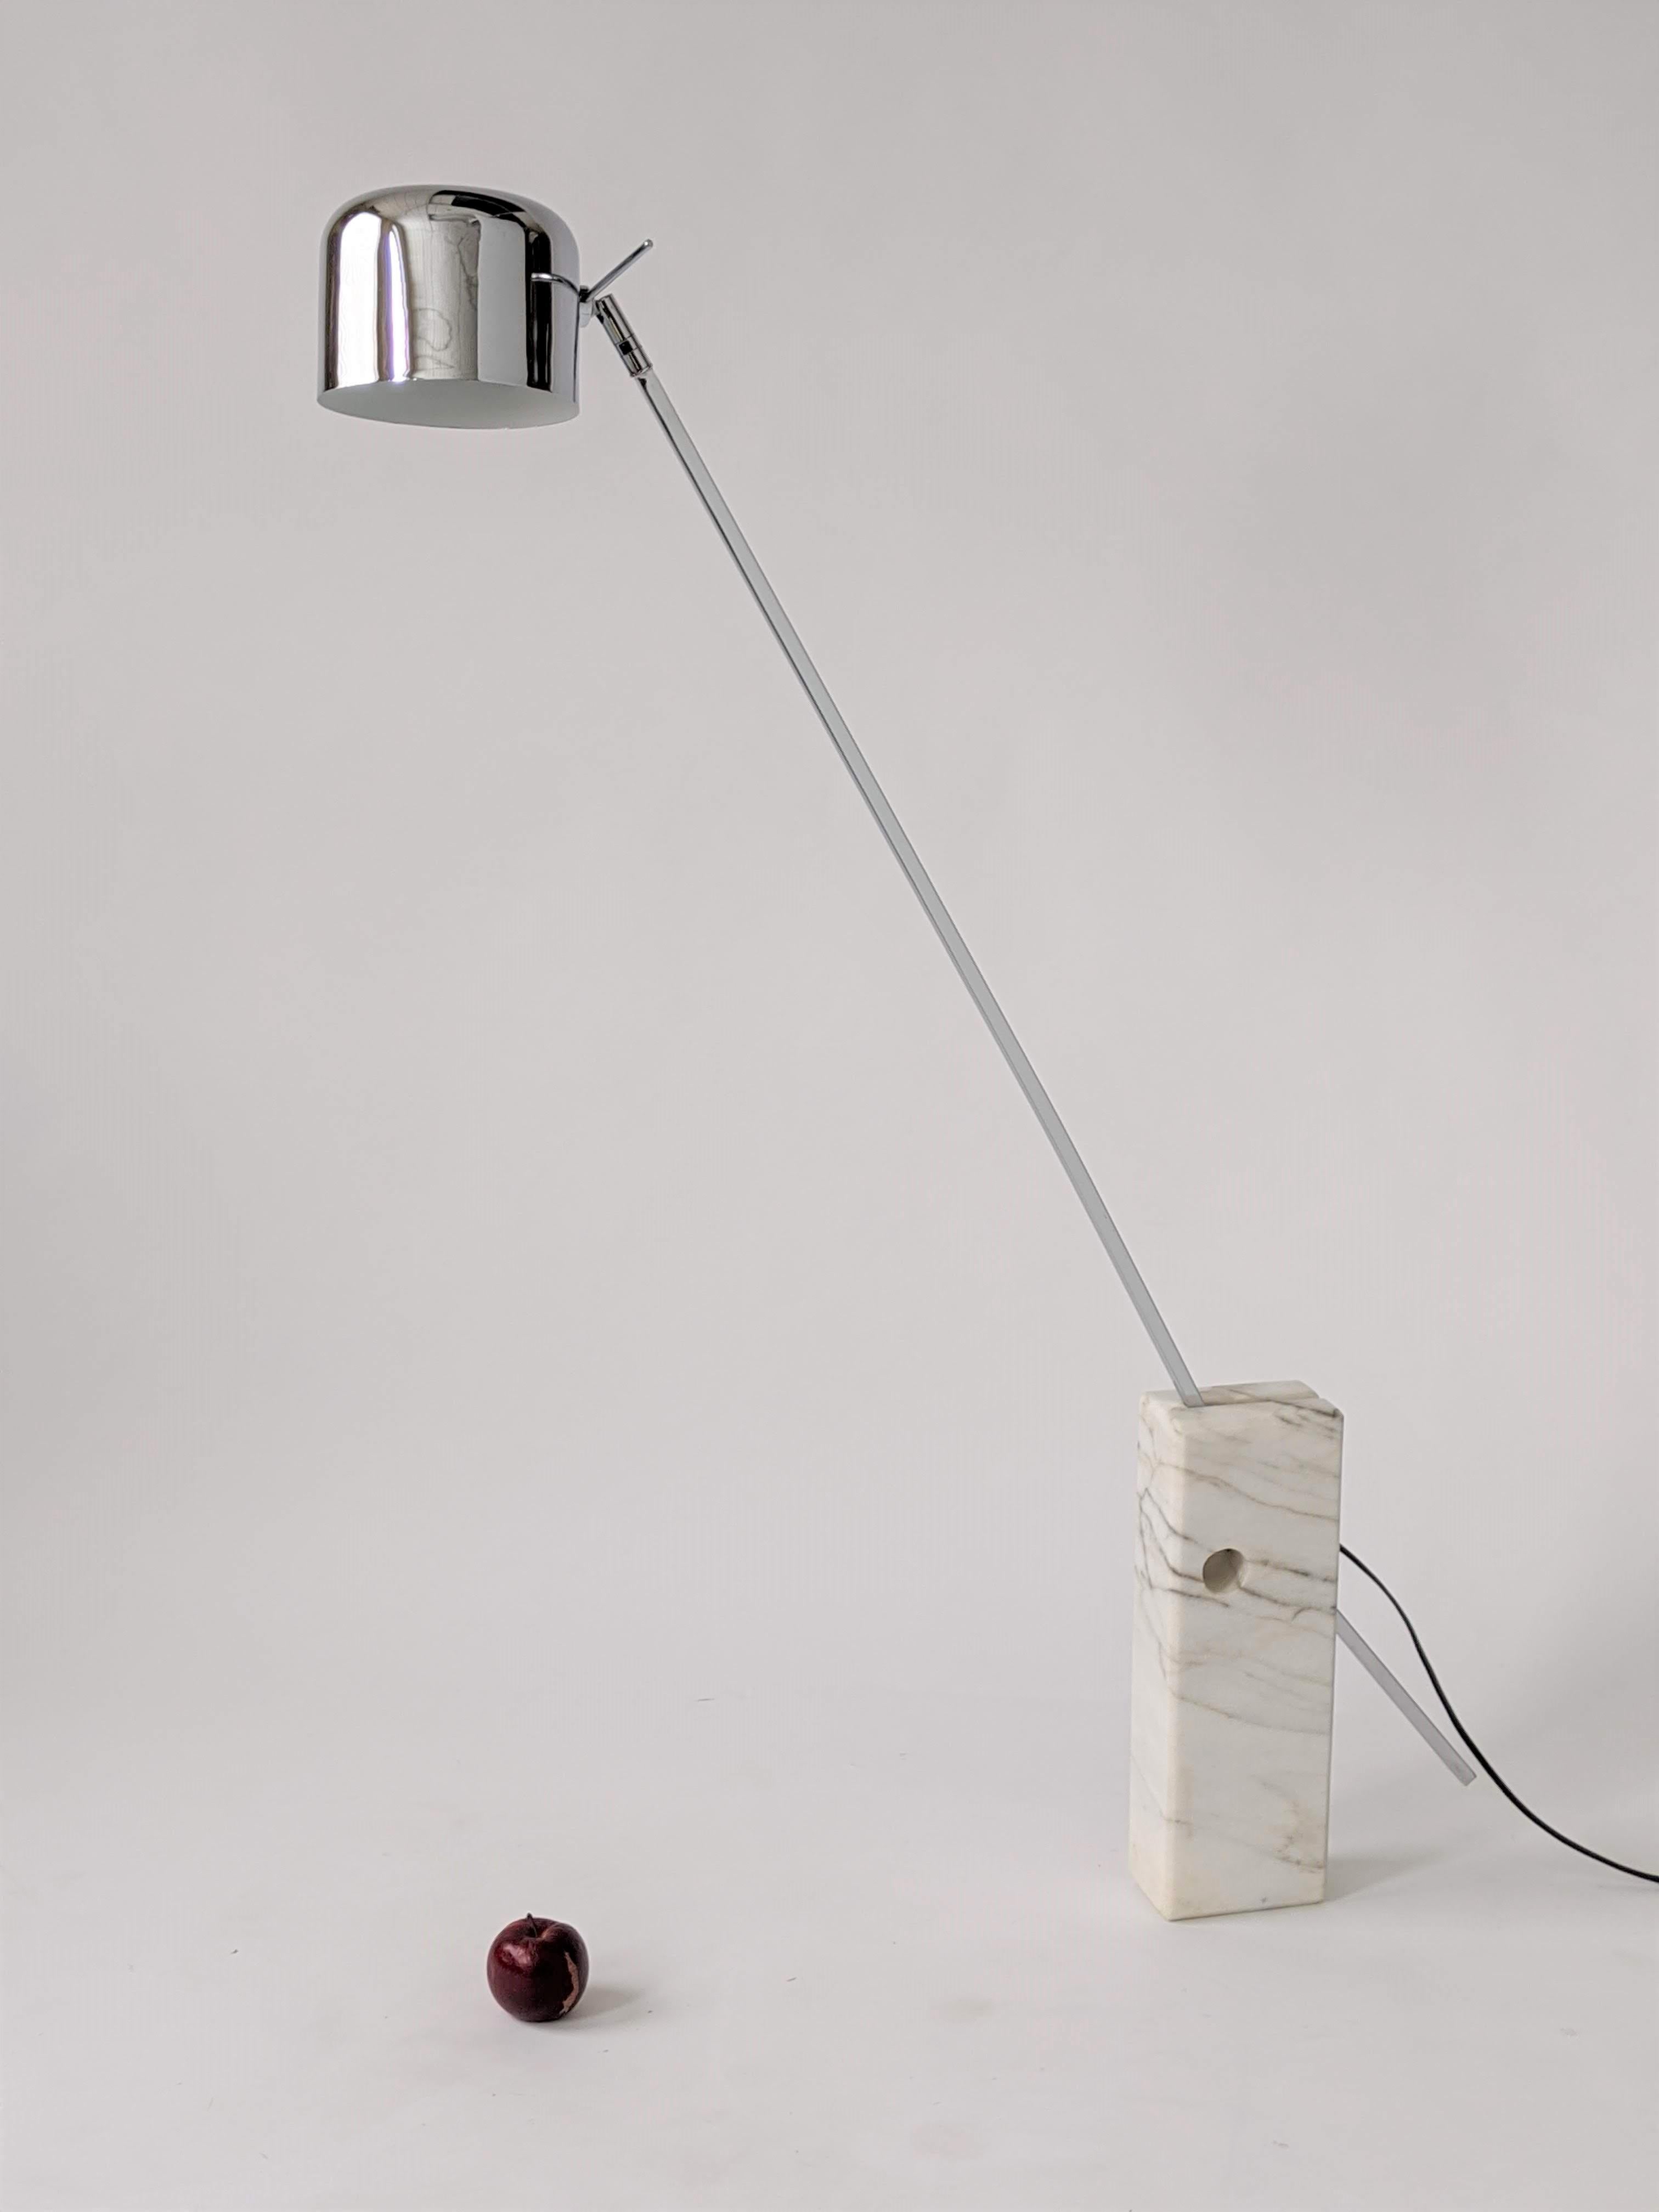 Small floor or huge table lamp with a bold modern Minimalist line. 

48 inches high chrome lamp on a marble base 

Contain one E26 size socket rated at 60 watt. 

Rewired. Foot switch on cord.